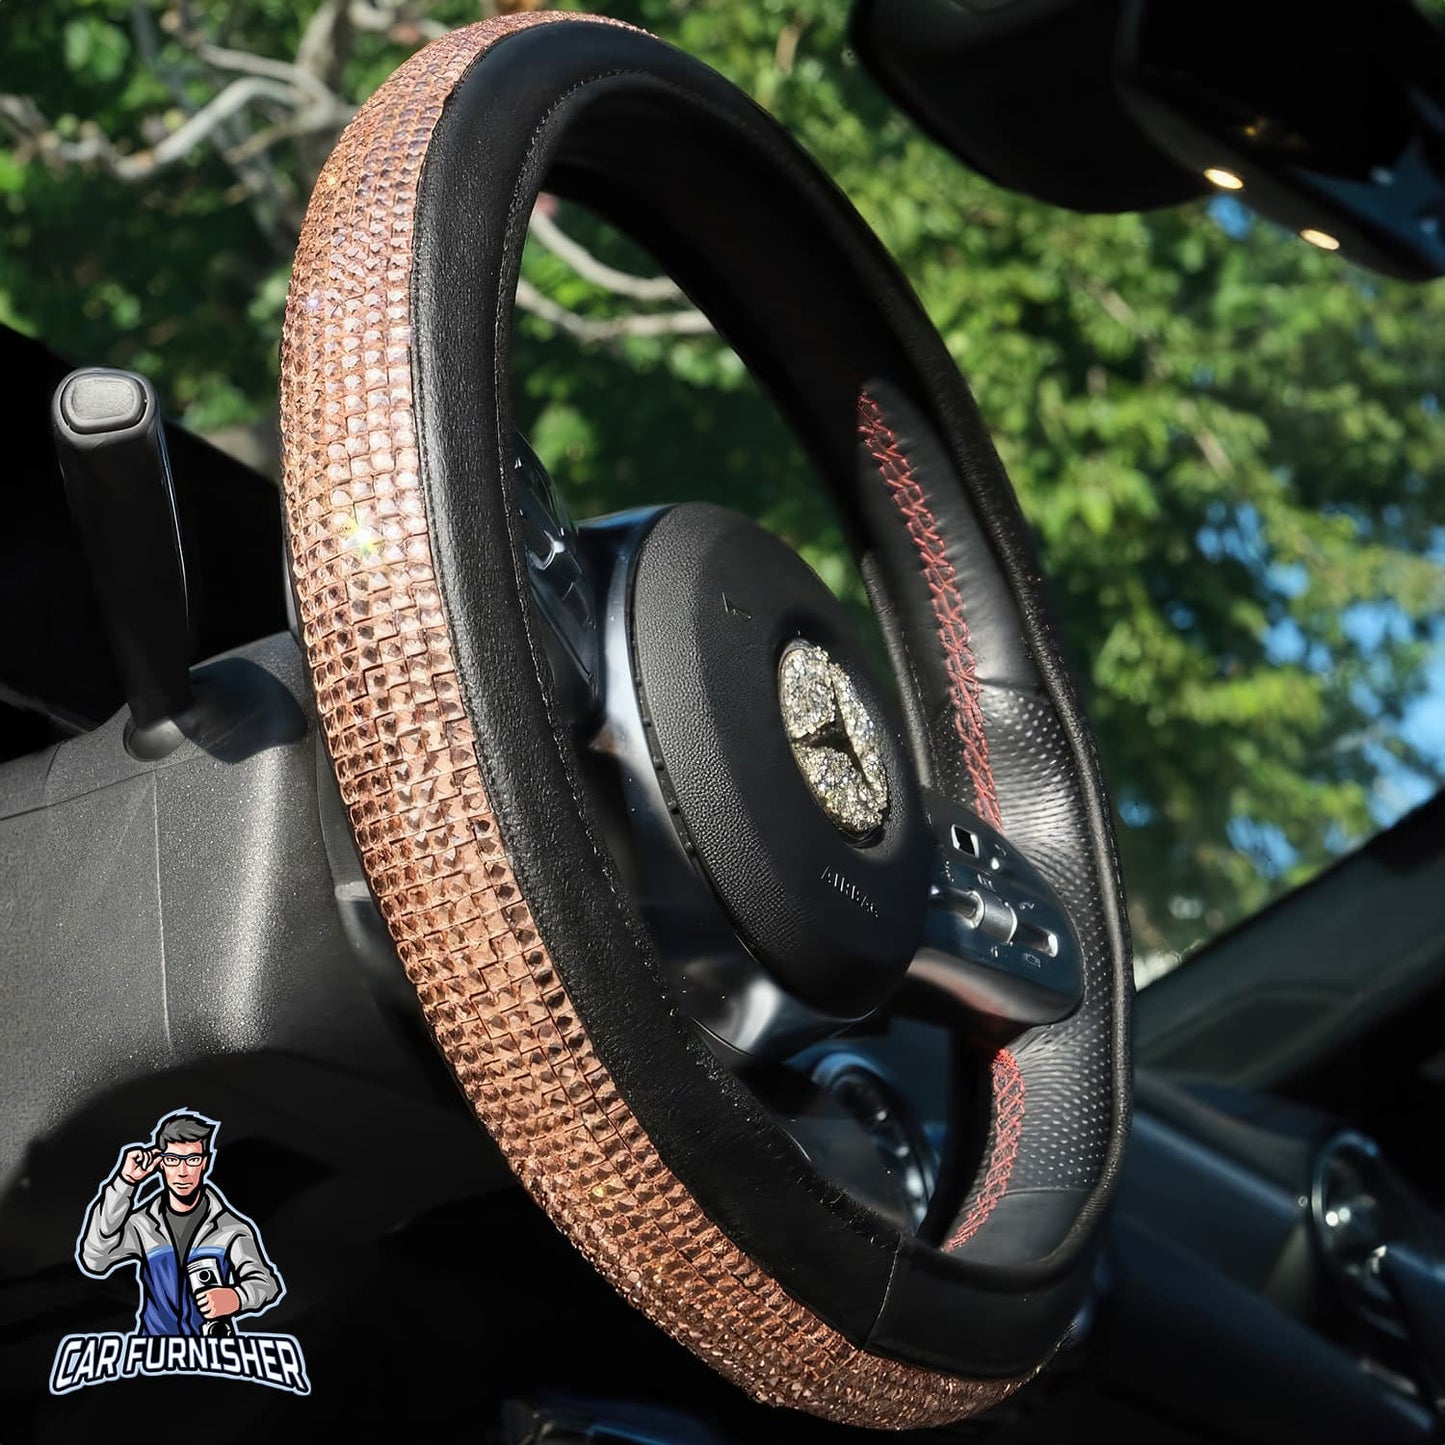 Sparkling Luxury Steering Wheel Cover | Swarovski Baguette Stones Rose Gold Leather & Fabric